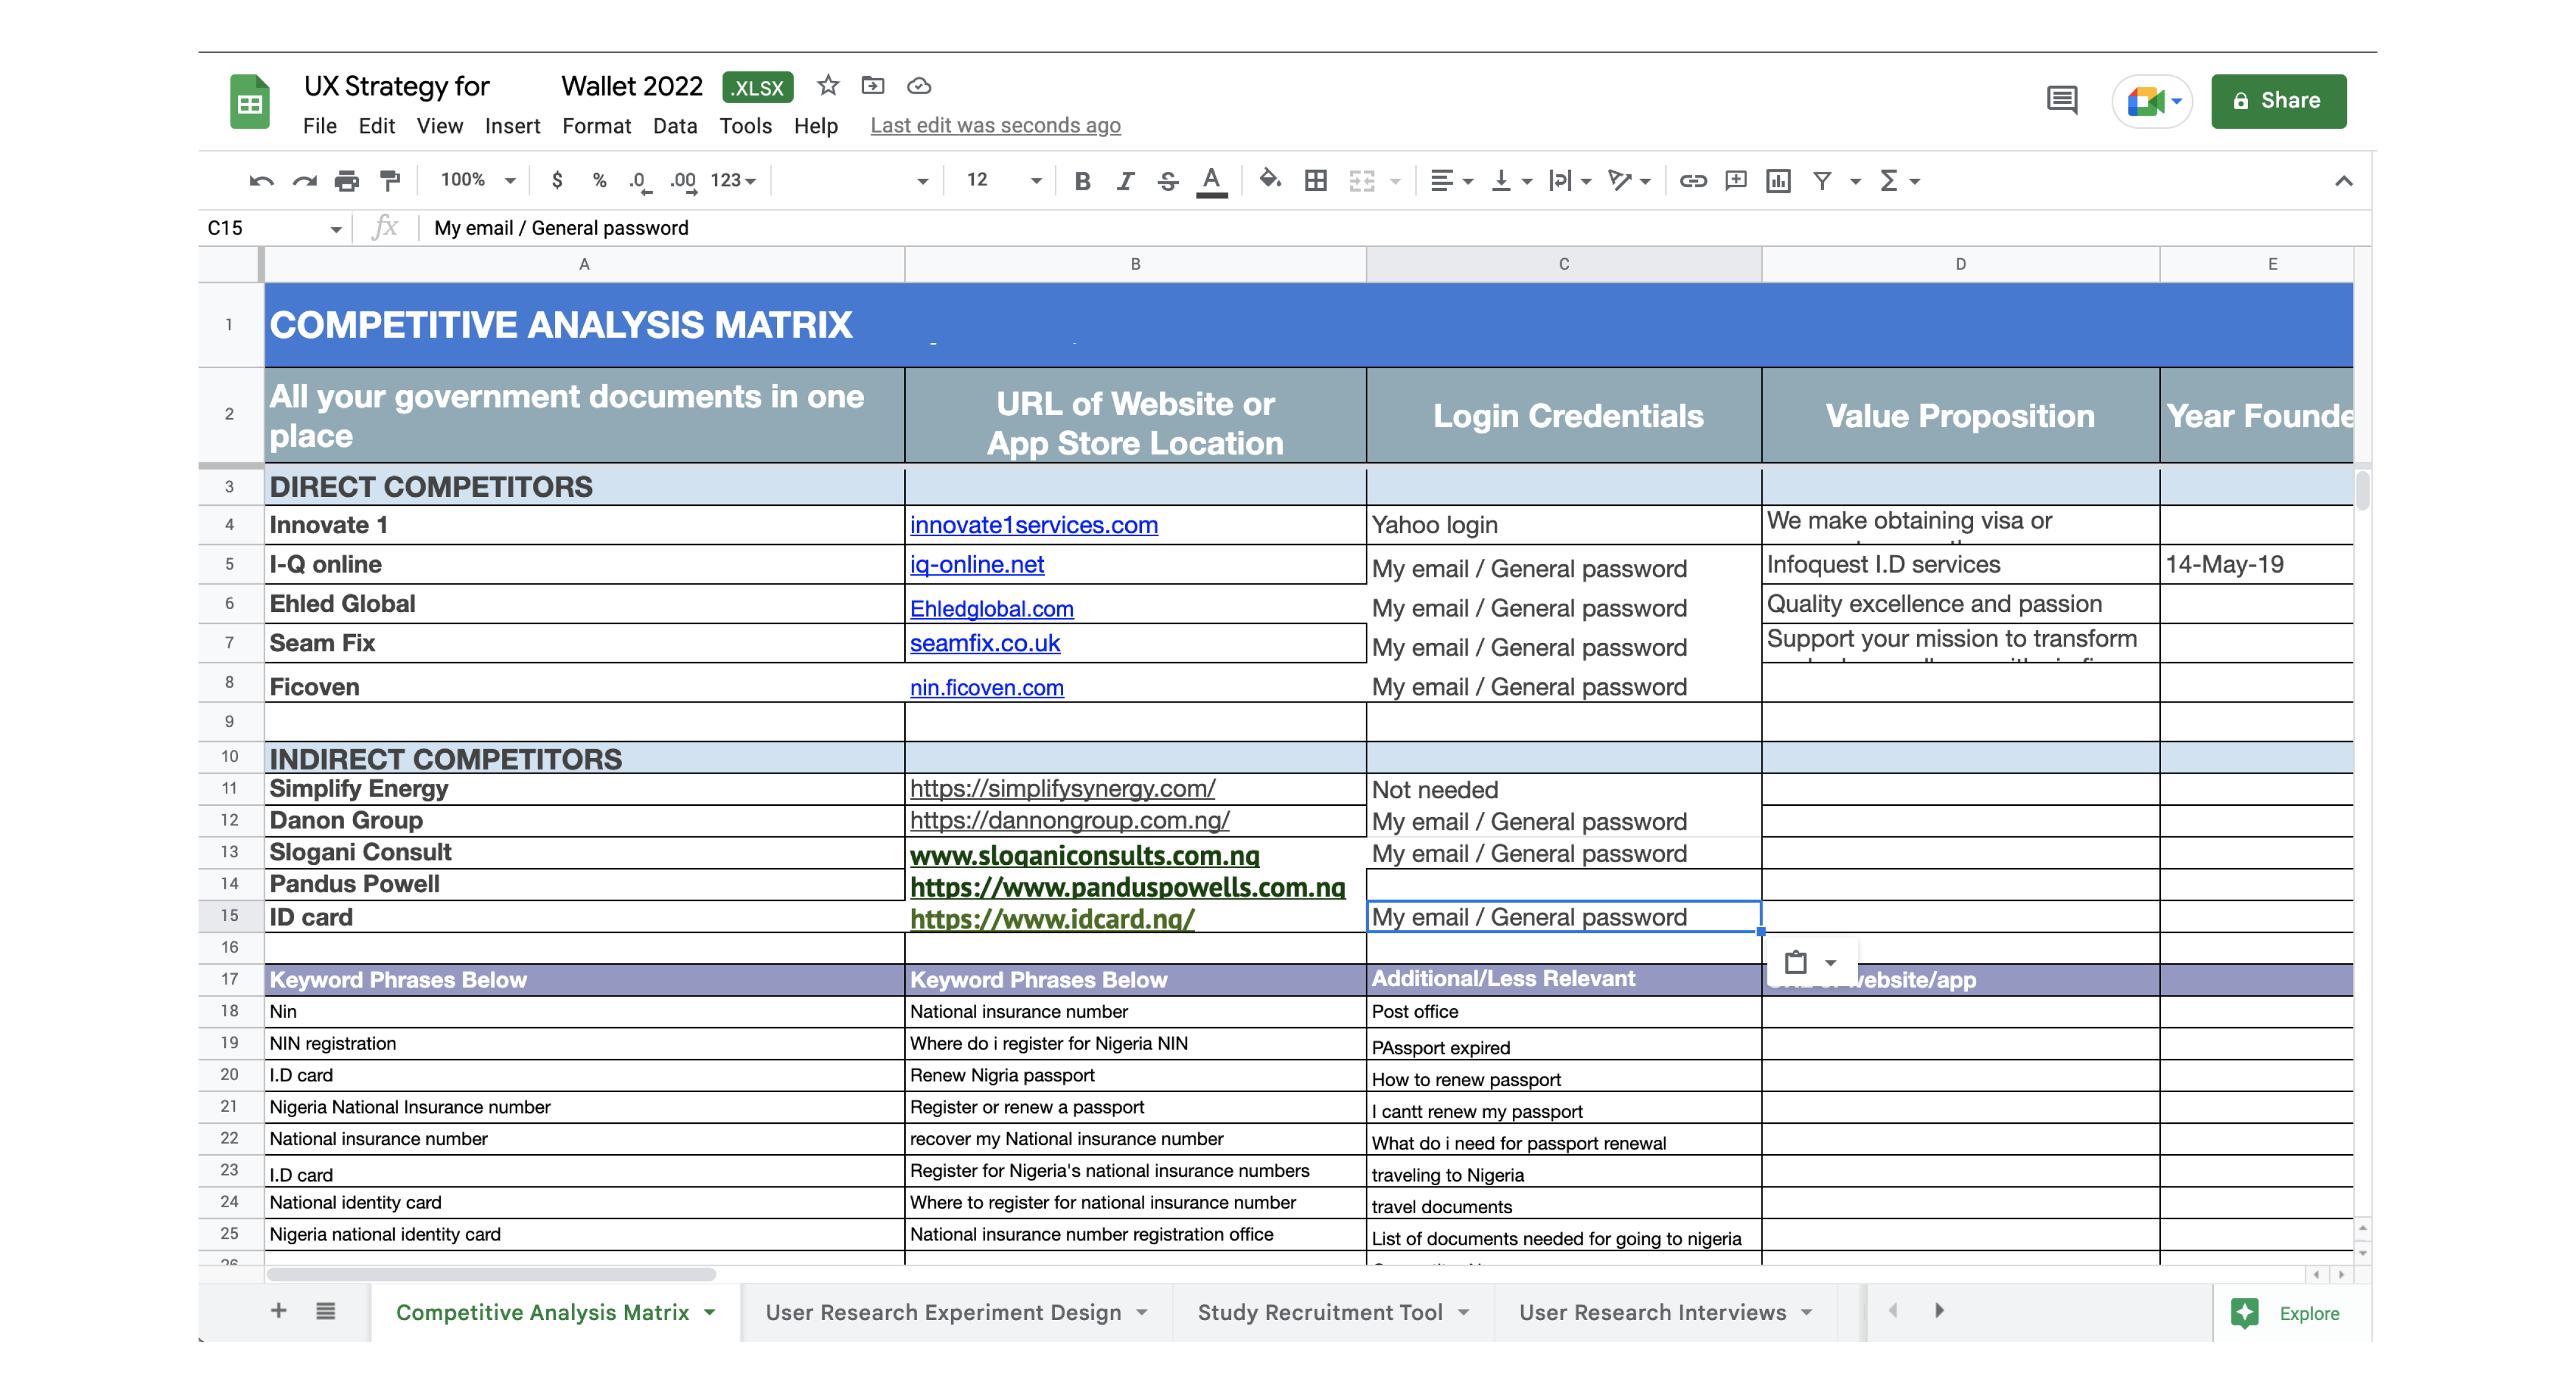 Abdul's project topic: Strategy, User needs and business goals. An image showing Abdul's UX strategy google document.